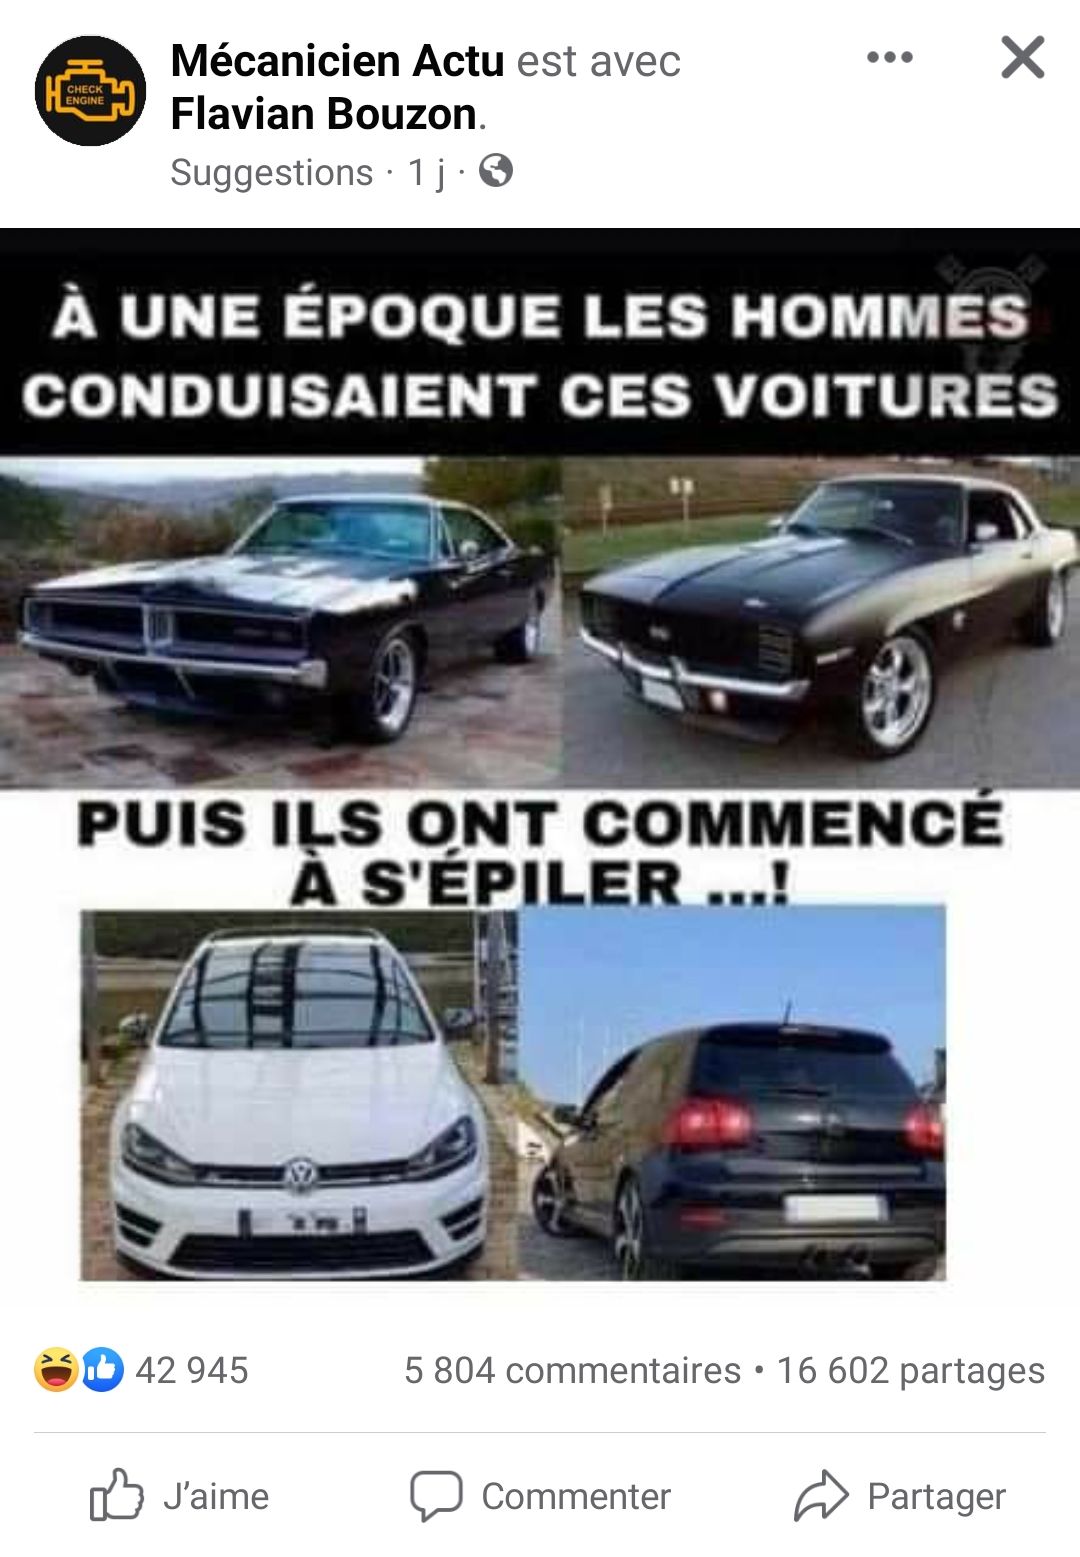 A crappy meme about cars, old cars are viril, modern cars are compared to waxed people